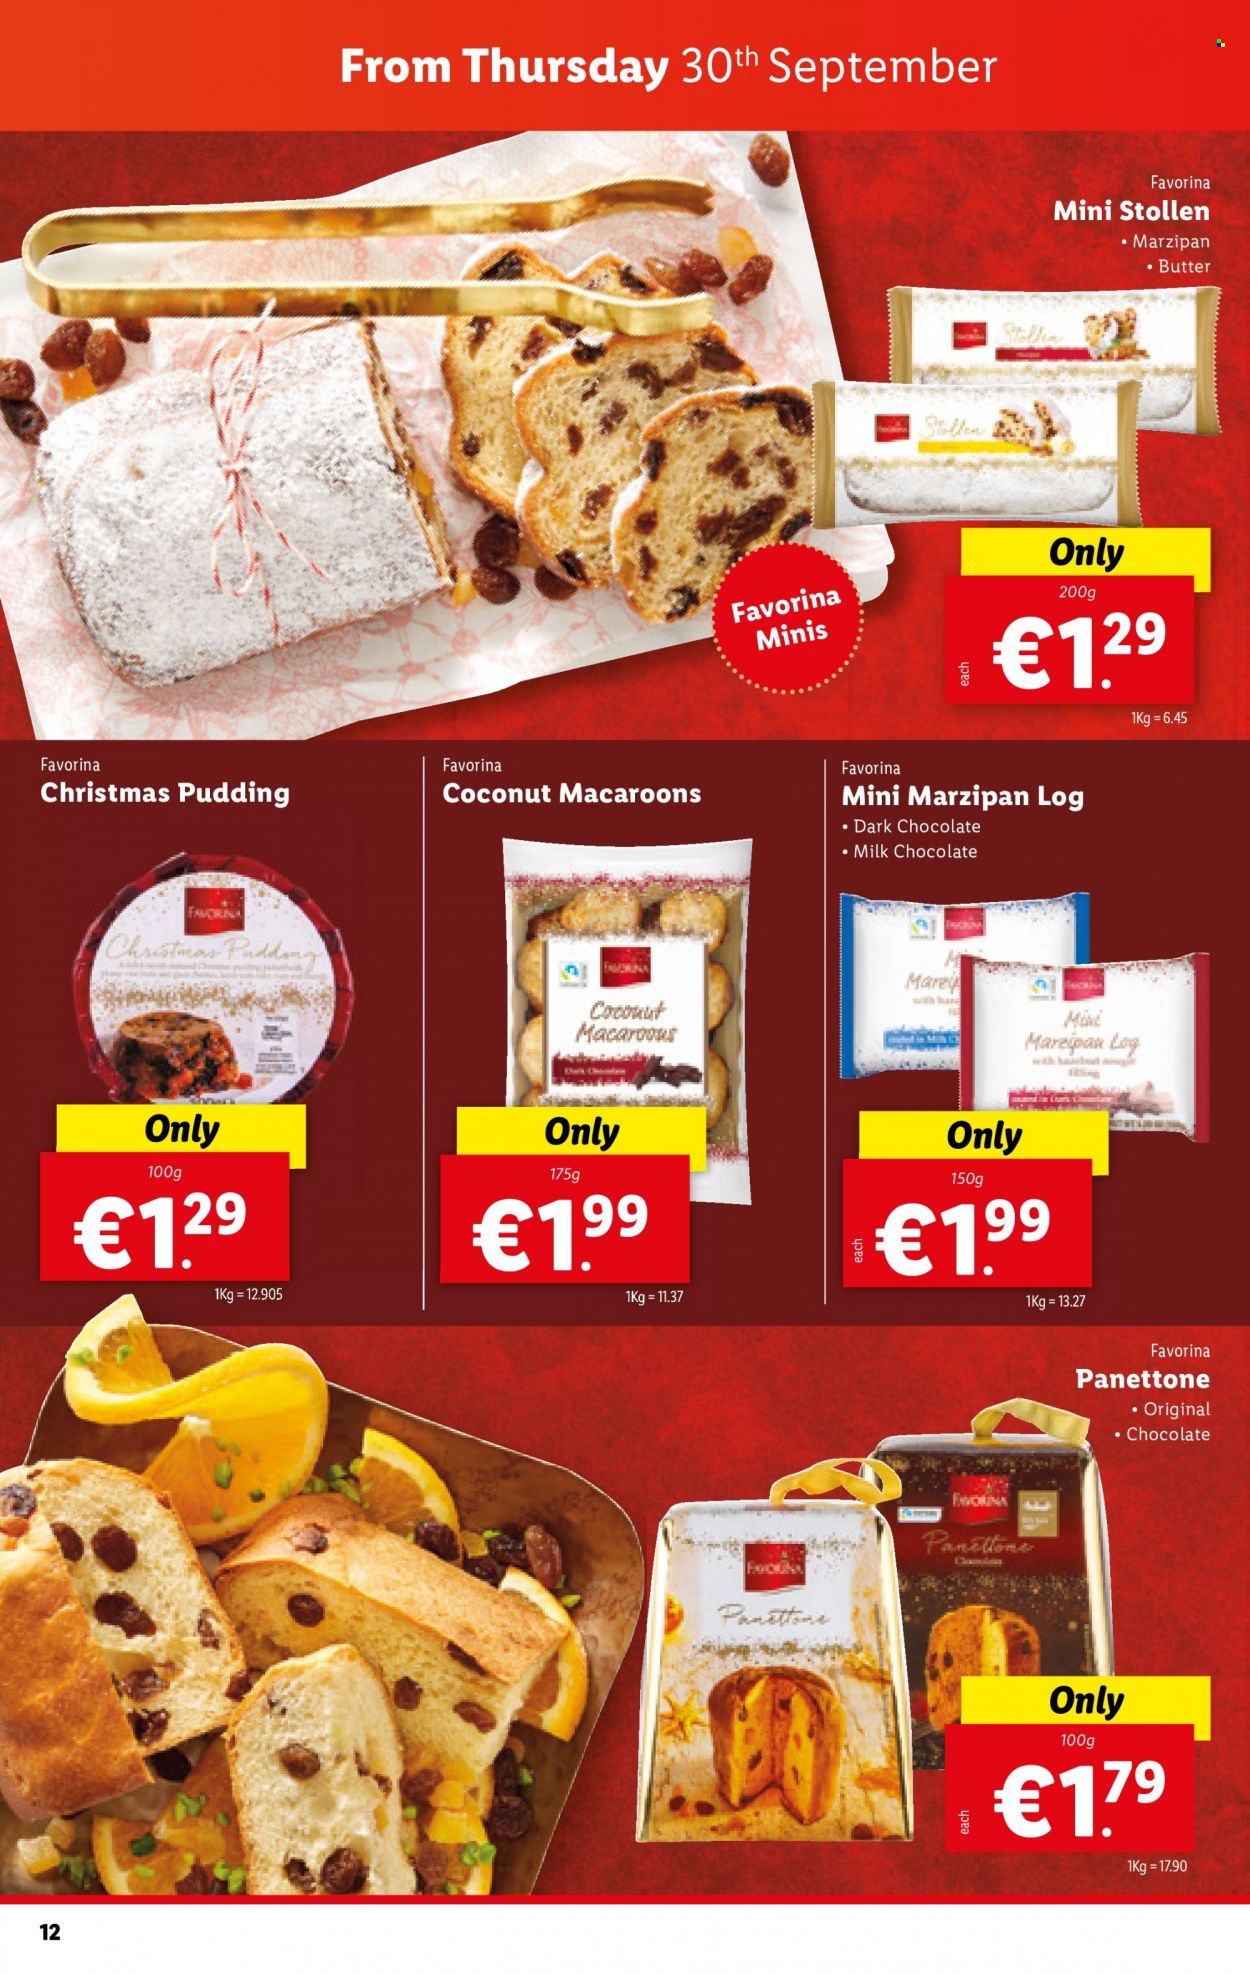 thumbnail - Lidl offer  - 30.09.2021 - 06.10.2021 - Sales products - mini stollen, stollen, panettone, macaroons, pudding, butter, marzipan log, milk chocolate, chocolate, dark chocolate. Page 12.